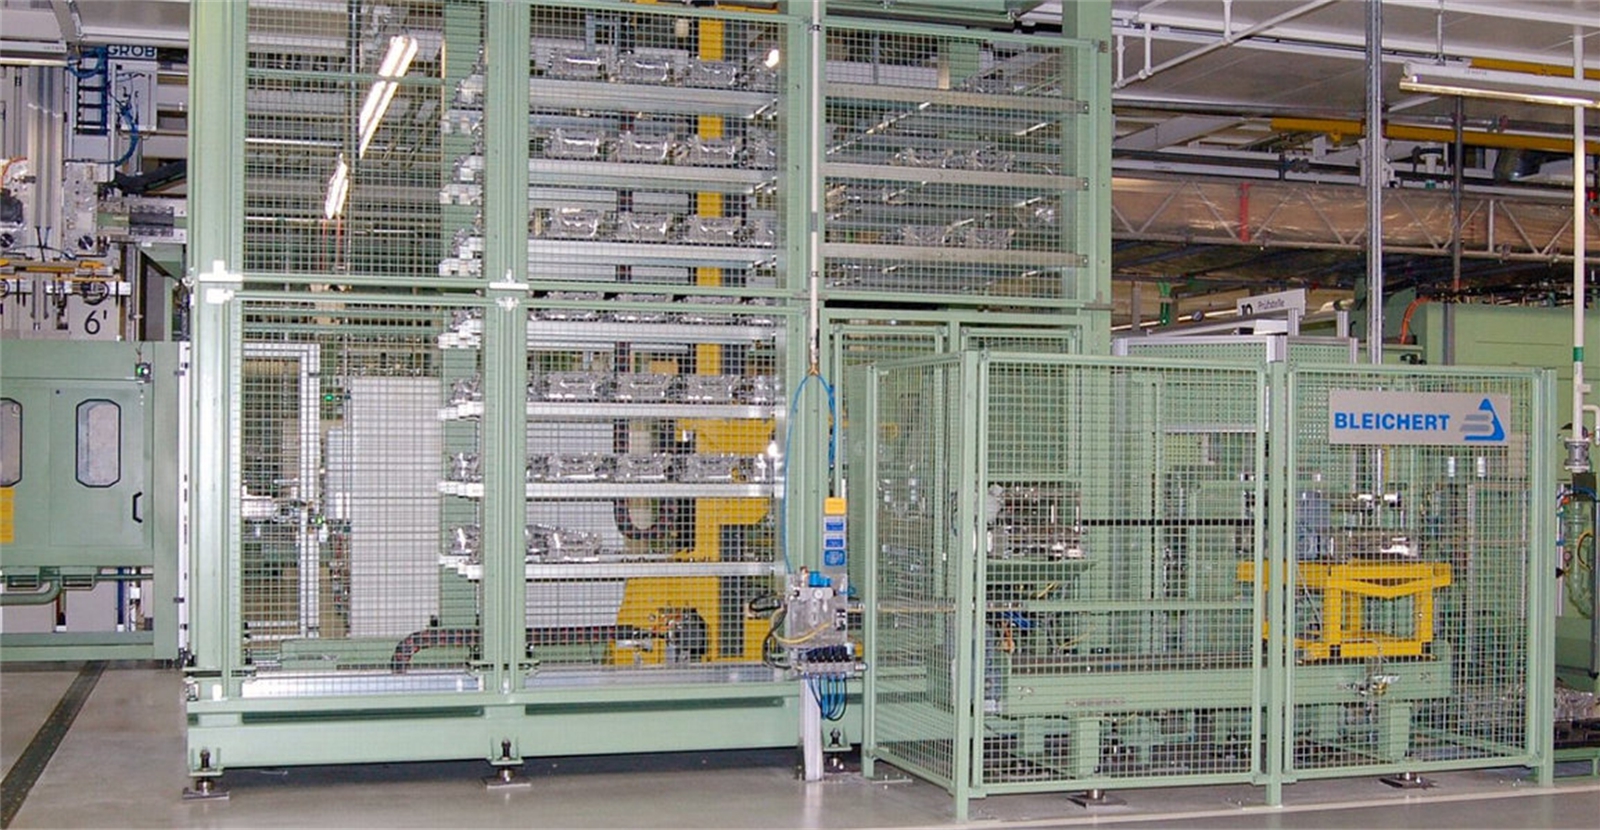 Automatic Storage and Retrieval Systems (ASRS)
